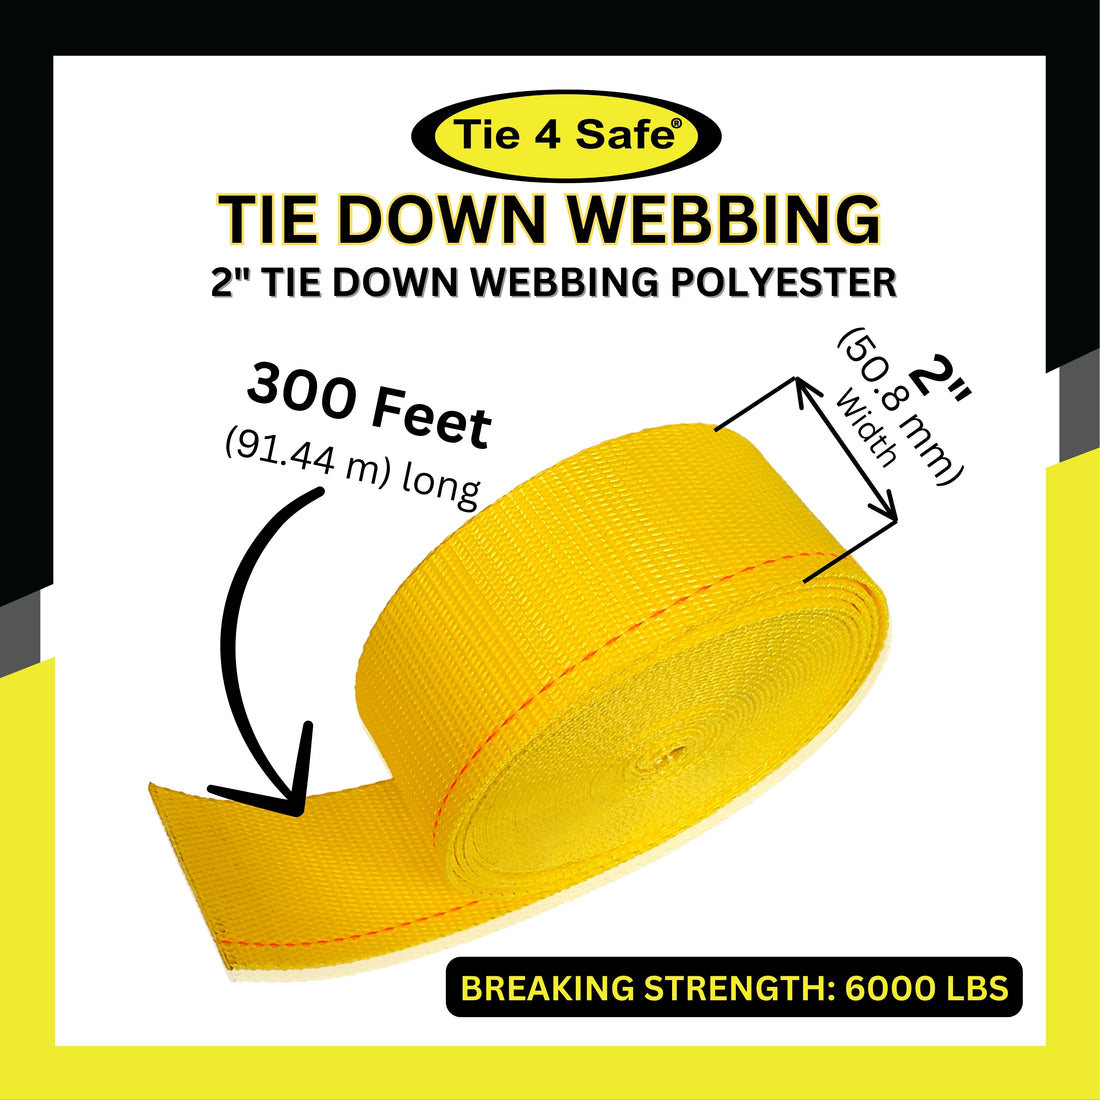 2" Tie Down Webbing Polyester - 6000 LBS